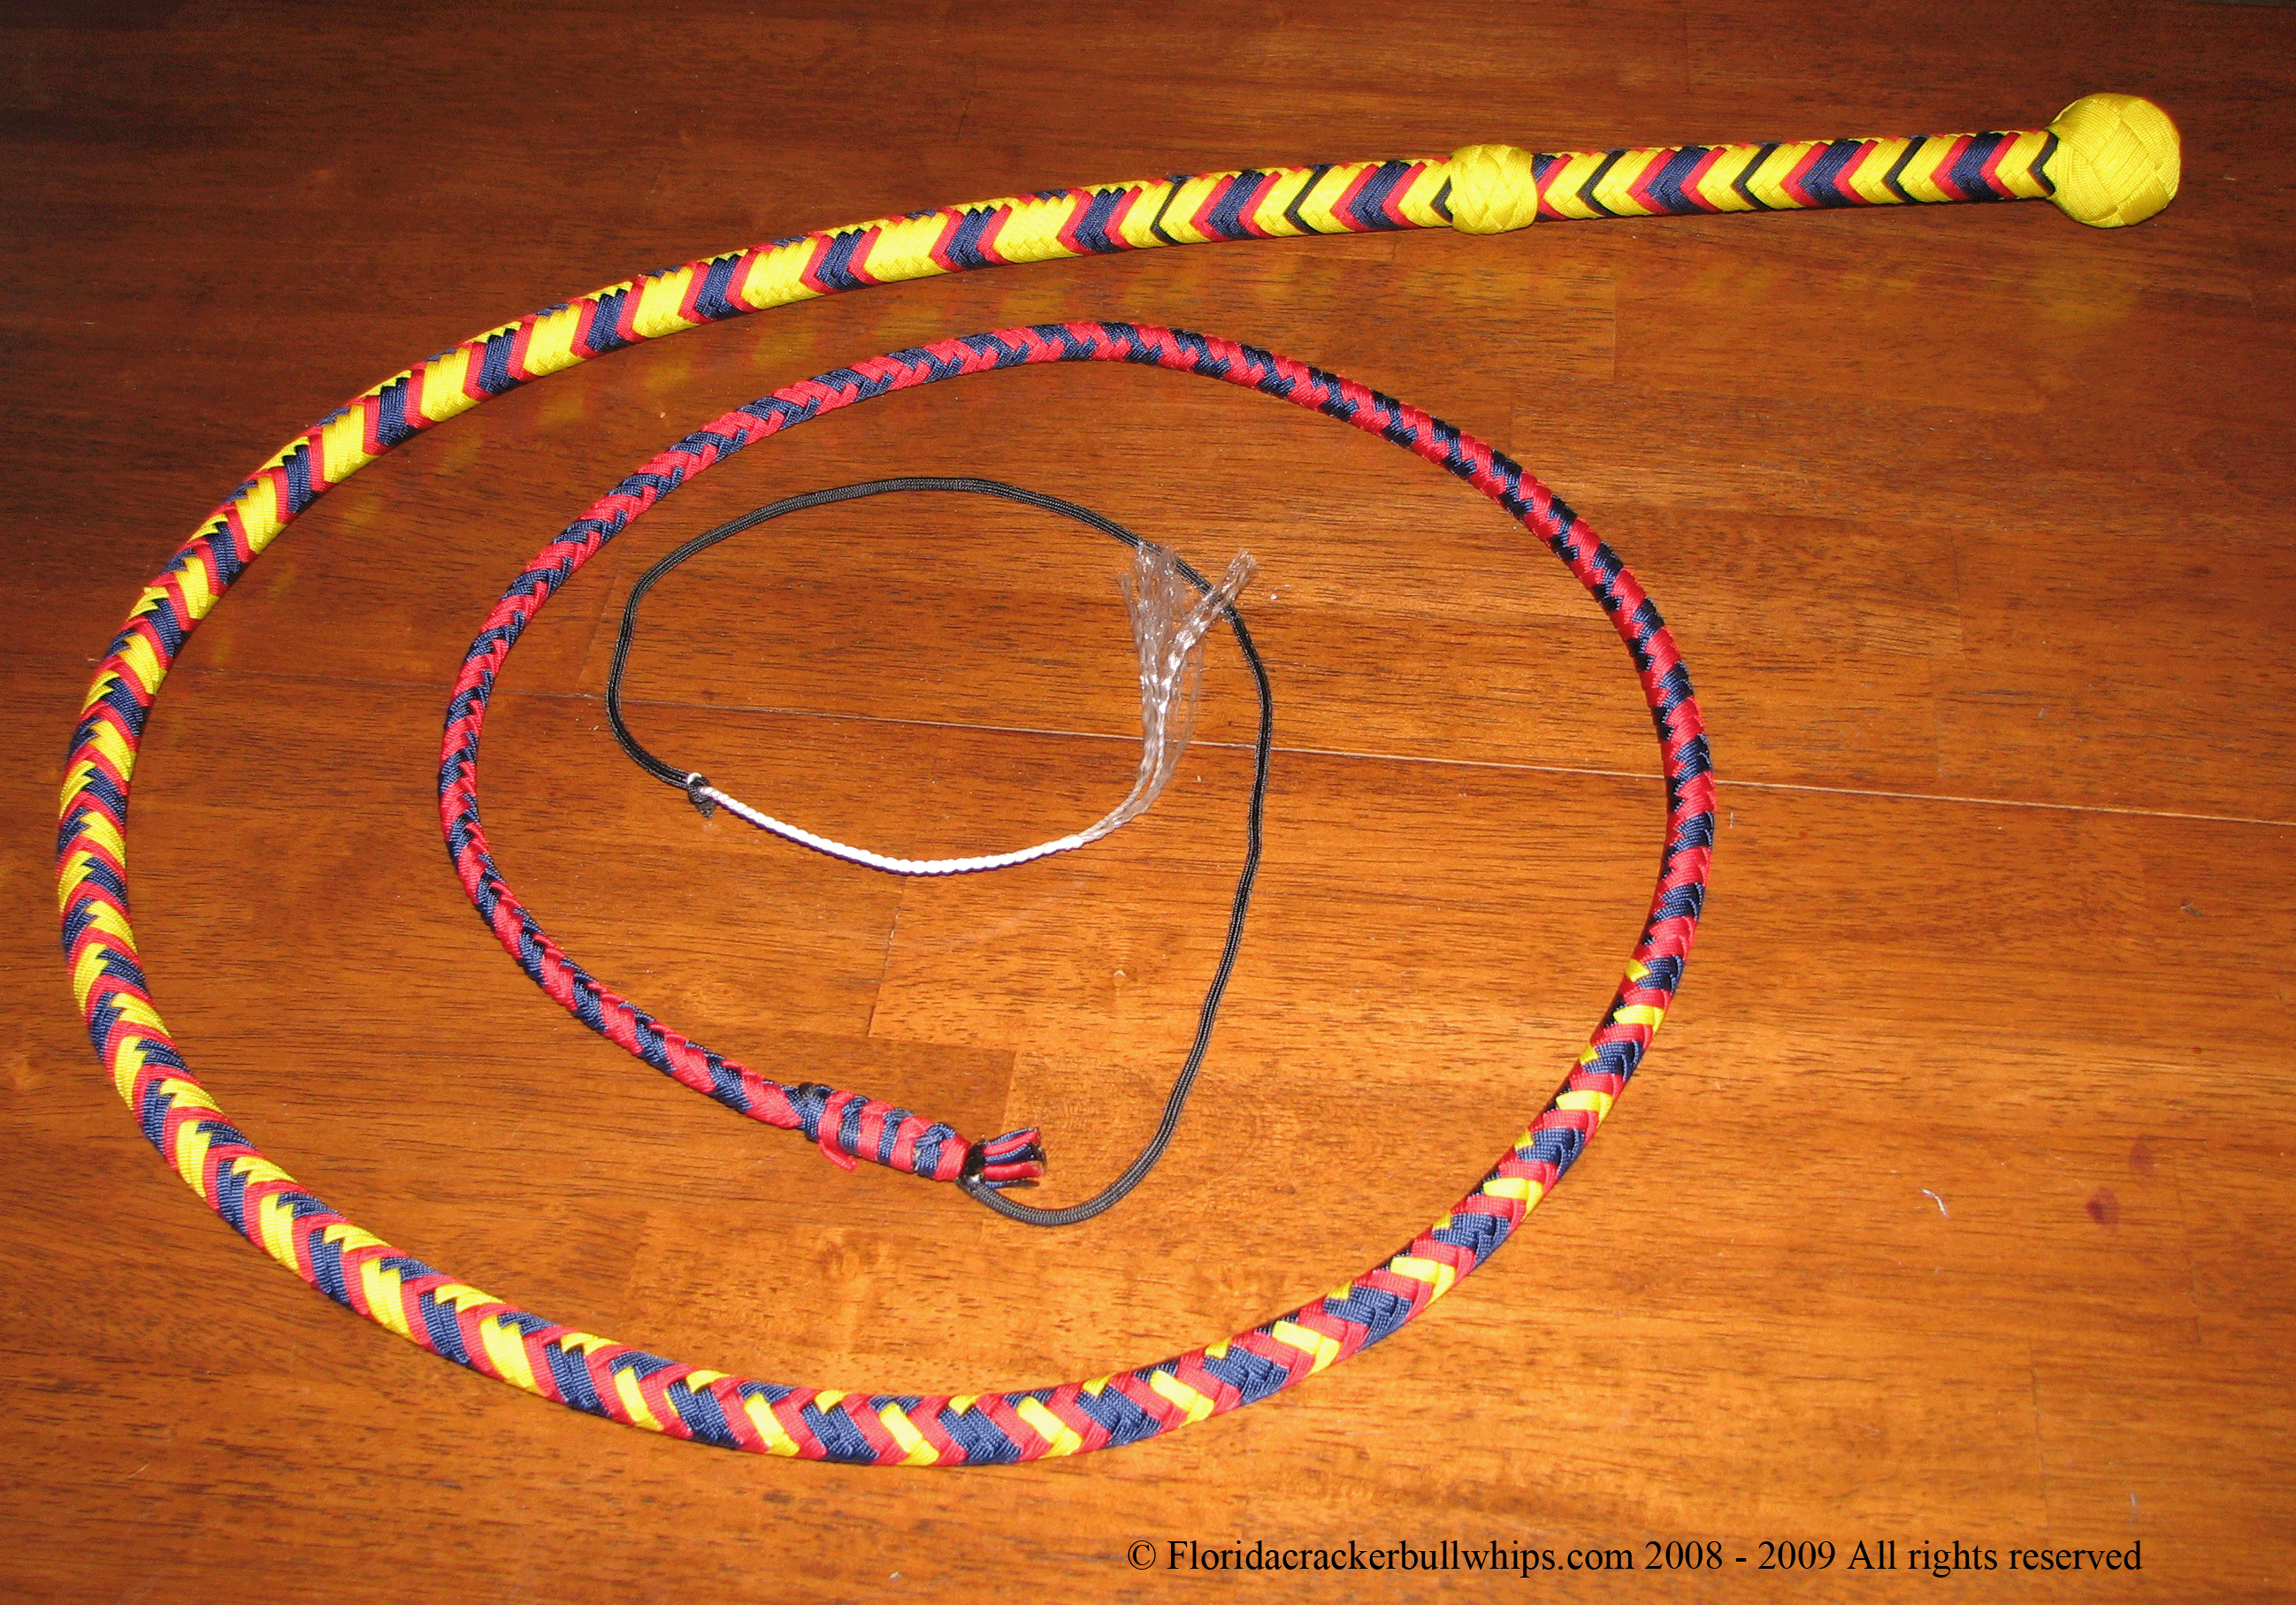 16 Plait nylon bullwhip in V-pattern colors imperial red, blue and yellow.